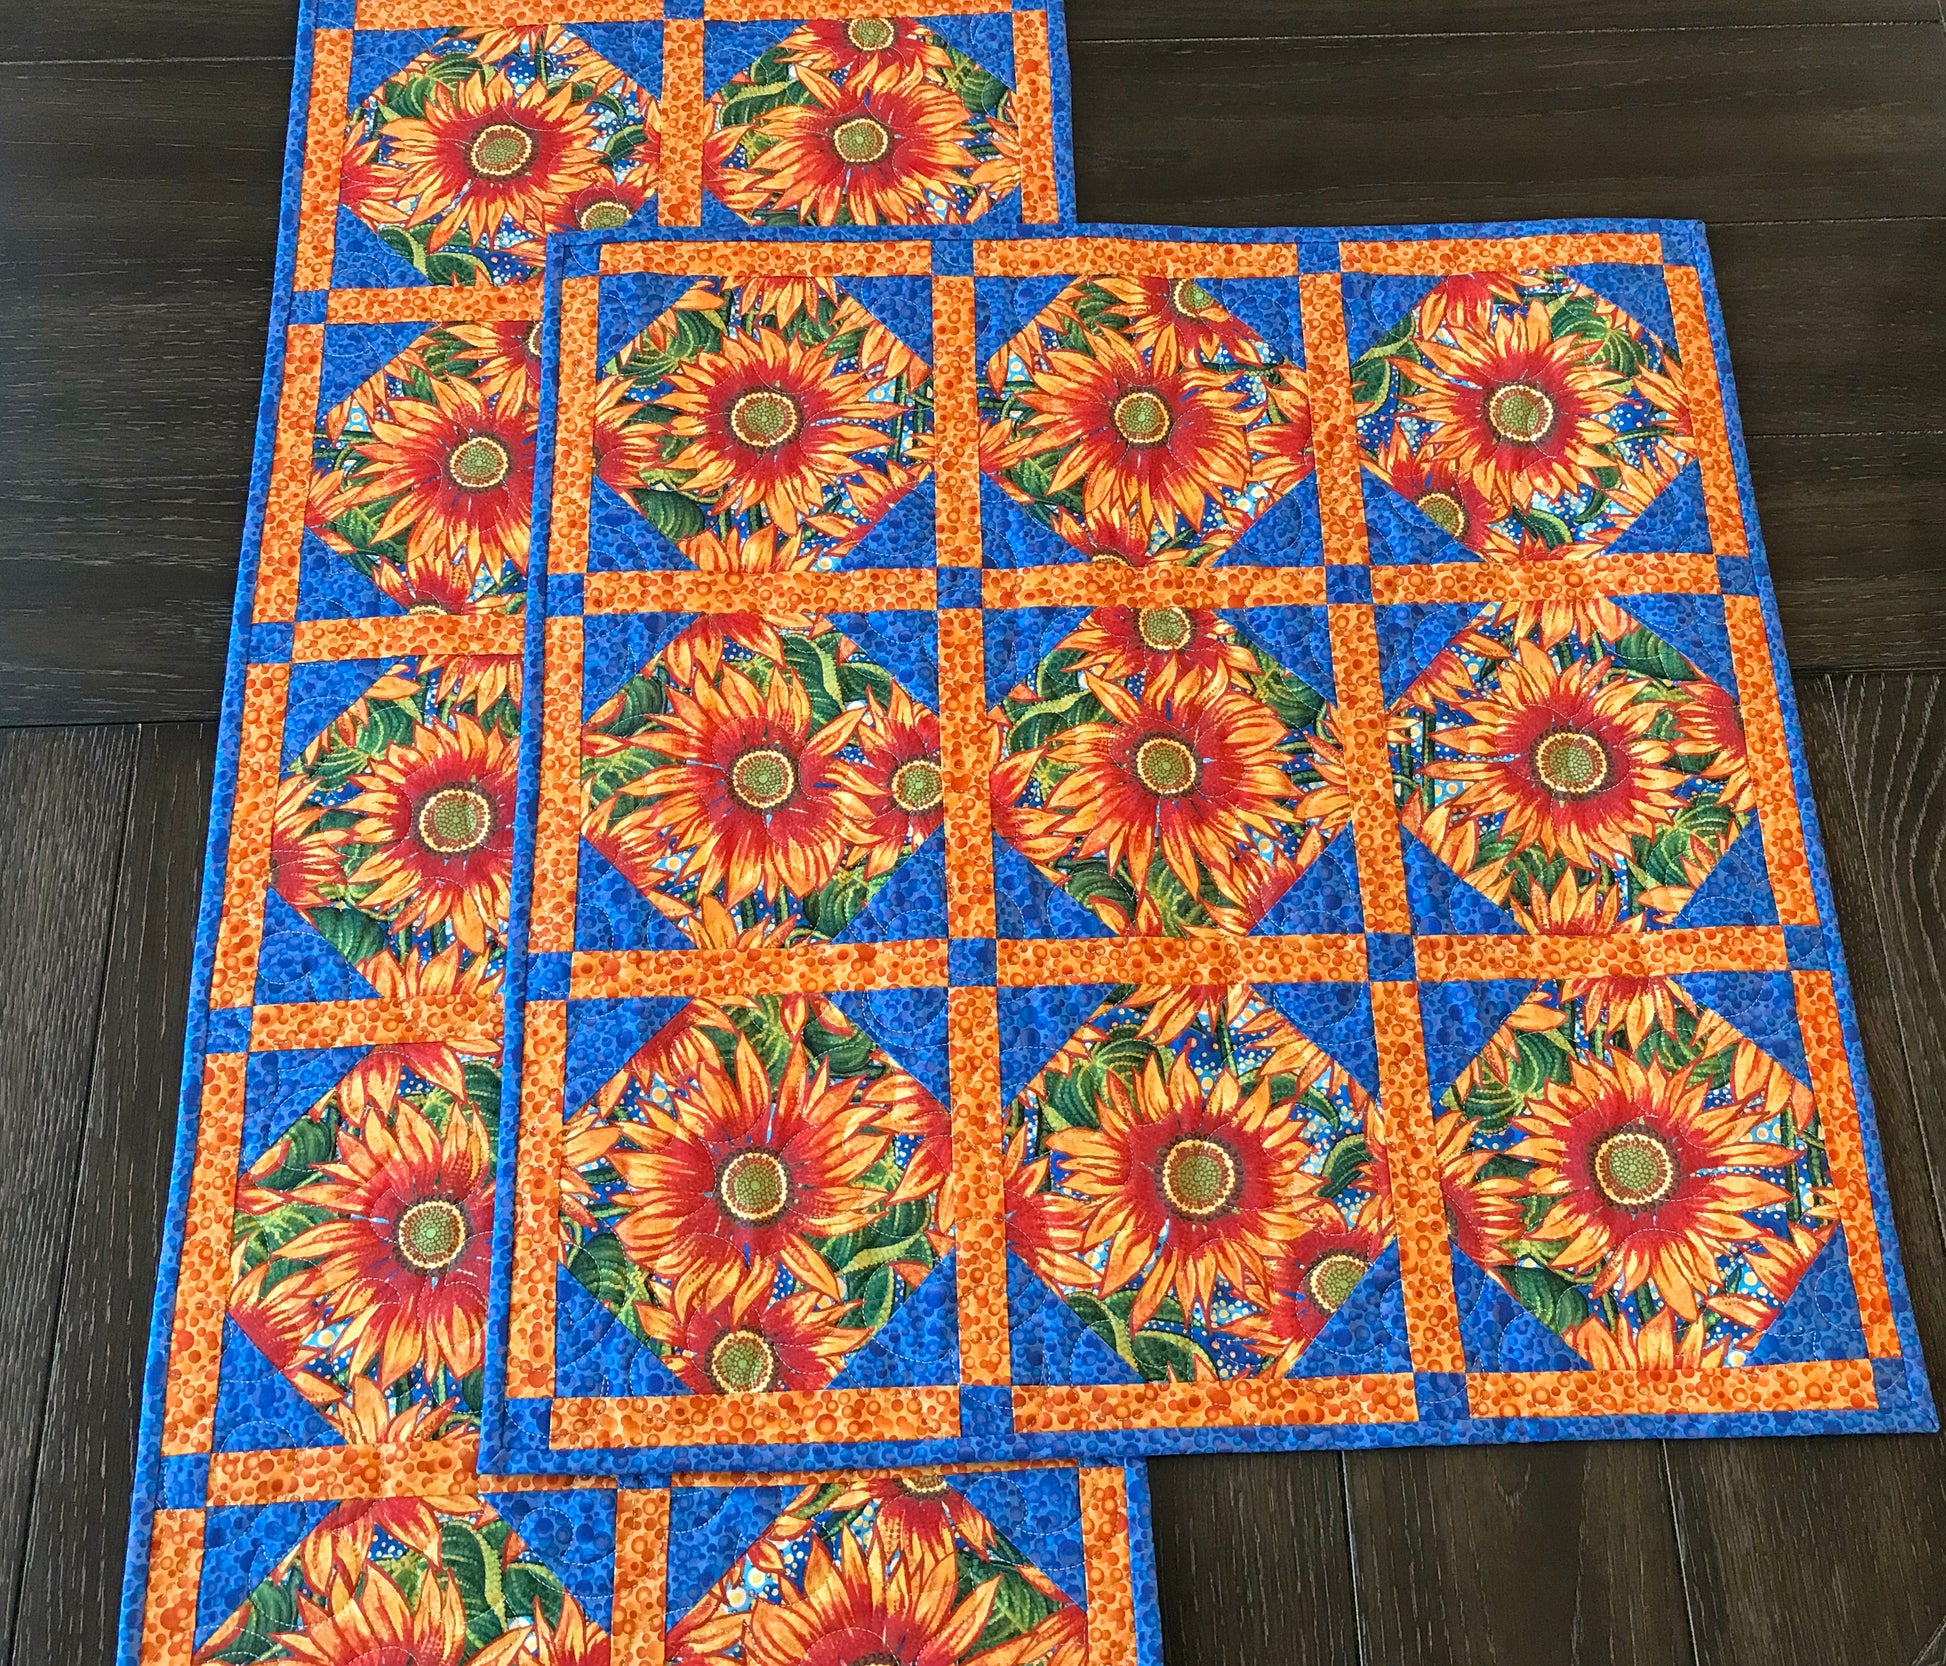 Kaleidoscope Table Runner and Table Topper Pattern - Digital Pattern - Handmade Quilts, Digital Patterns, and Home Décor items online - Cuddle Cat Quiltworks